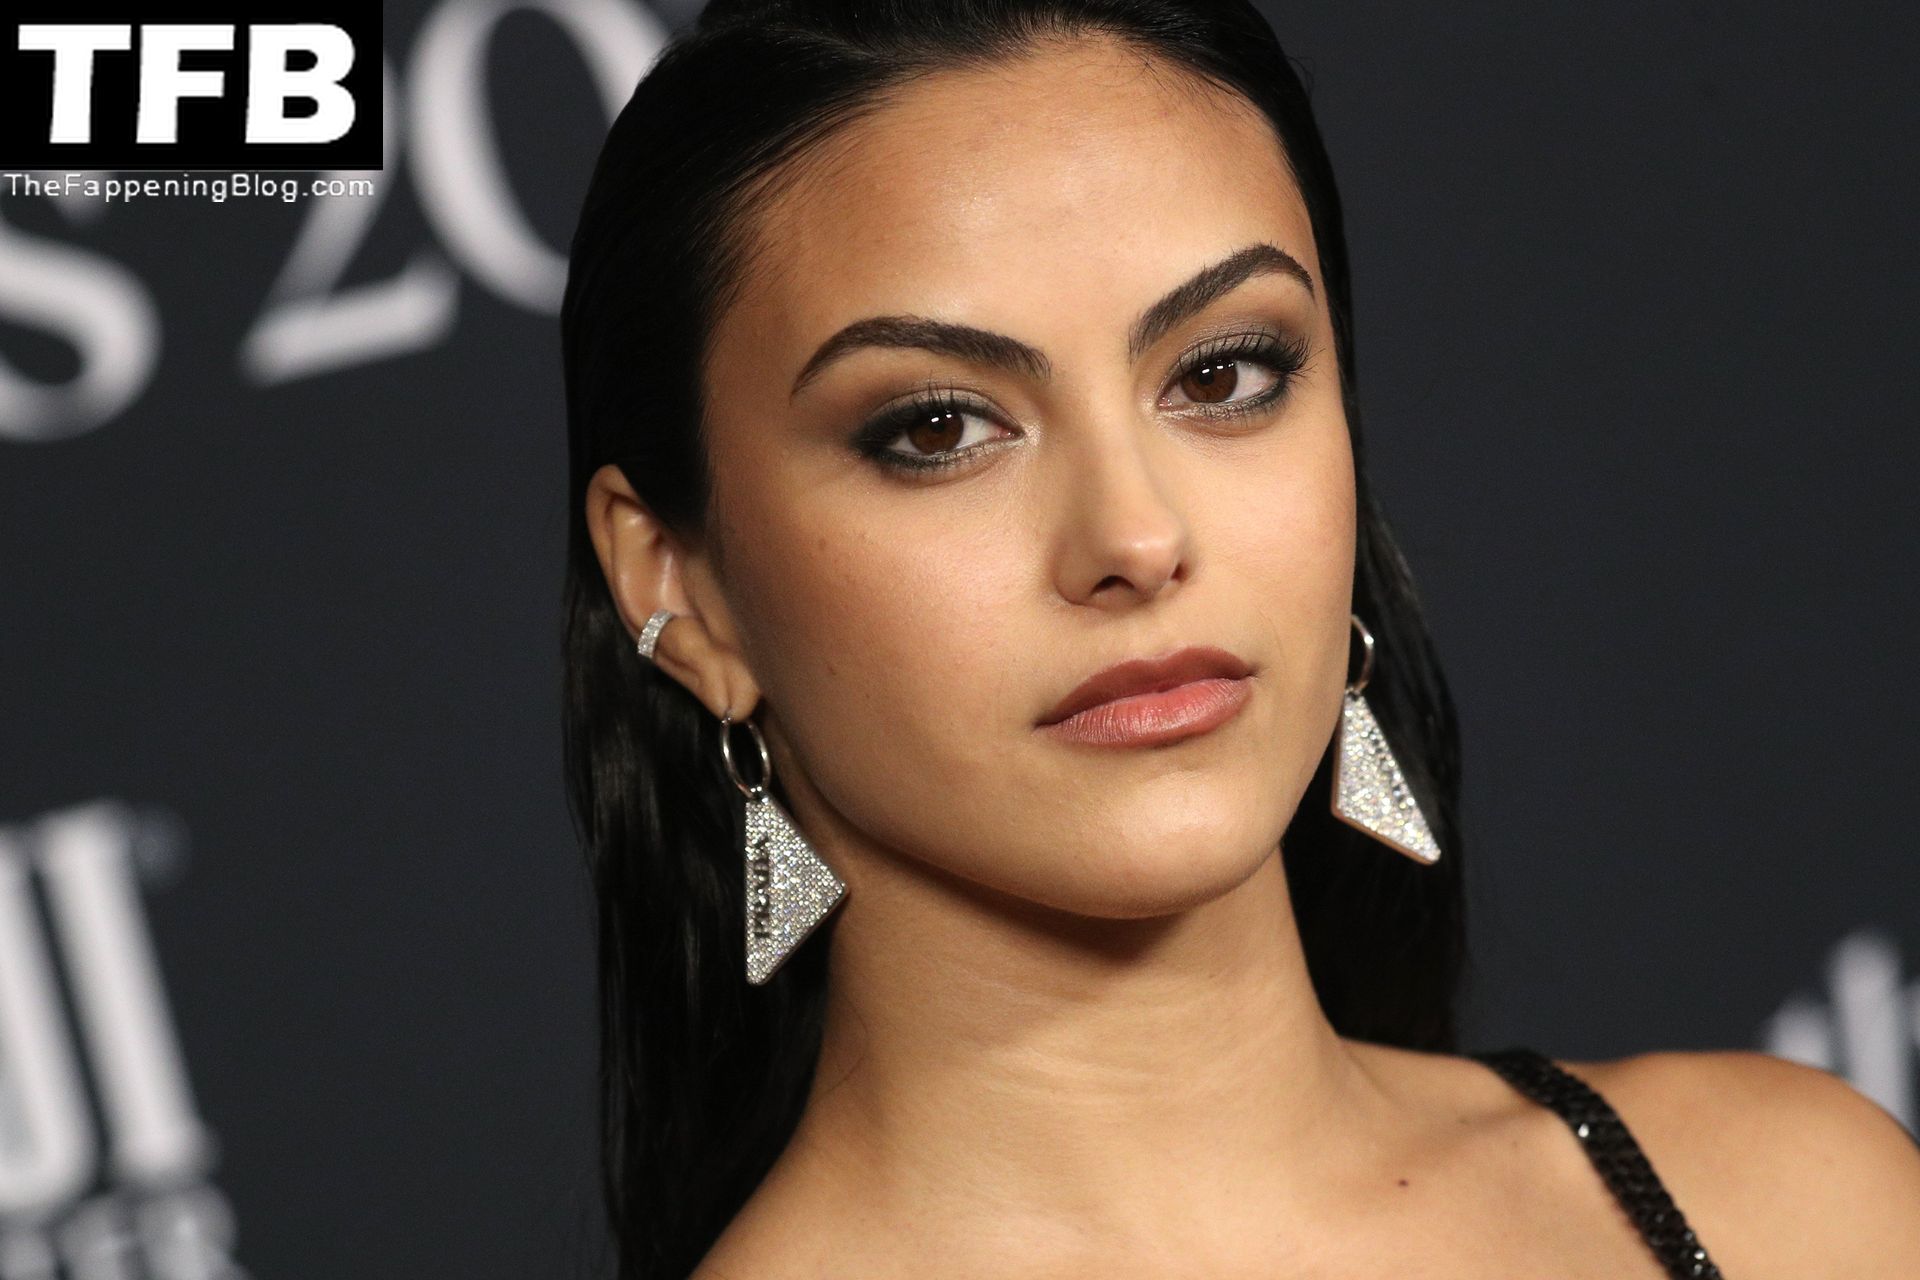 Camila-Mendes-See-Through-Tits-The-Fappening-Blog-81.jpg